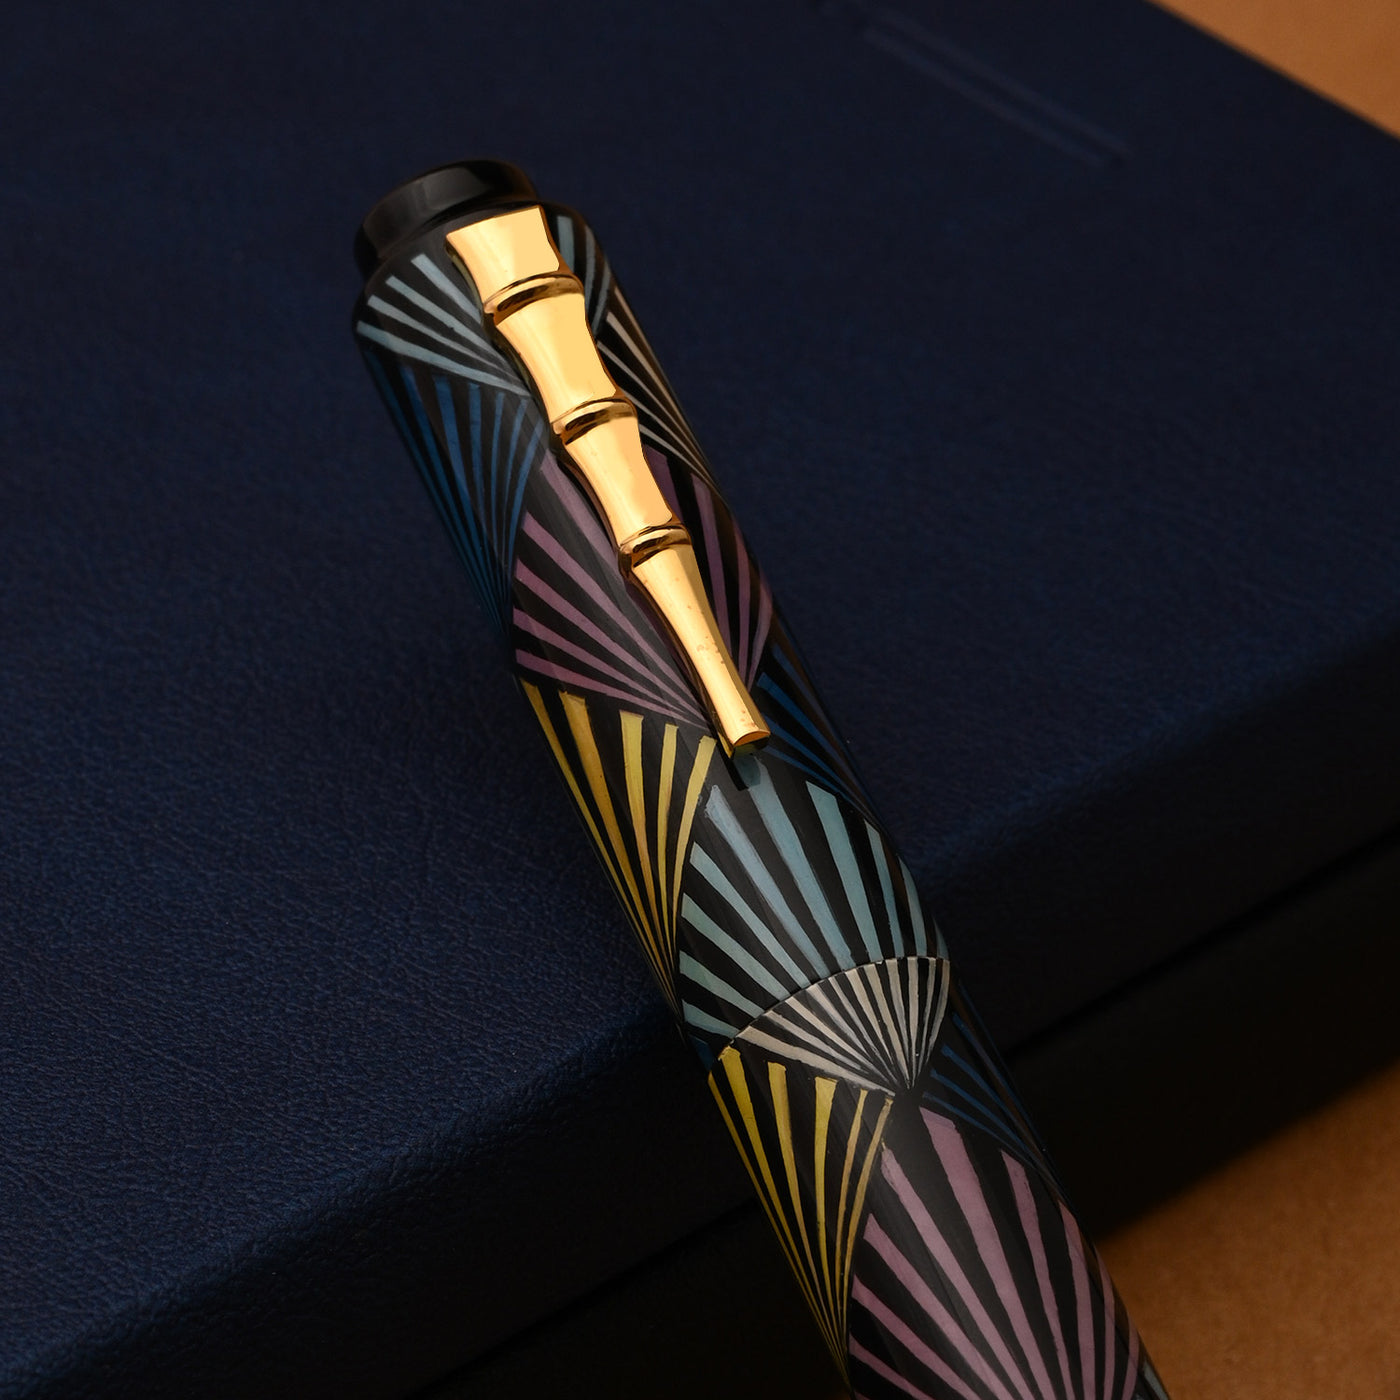 AP Limited Editions Russian Lacquer Art Fountain Pen - An Ode to Art Deco 11